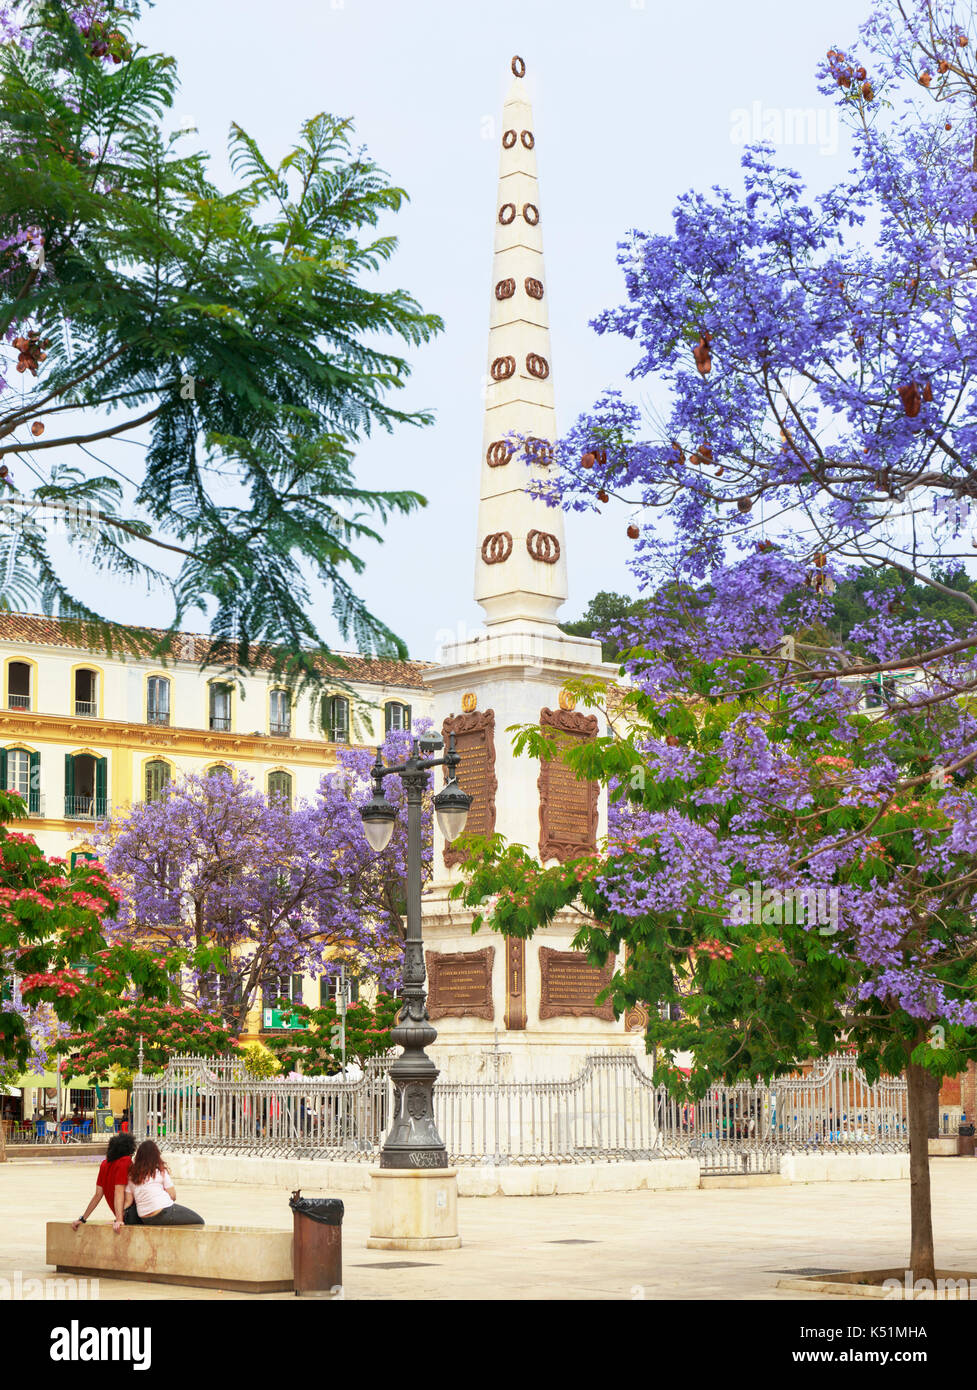 Malaga, Malaga Province, Costa del Sol, Andalusia, southern Spain.  Plaza de la Merced and Monument to General Torrijos and followers. Stock Photo